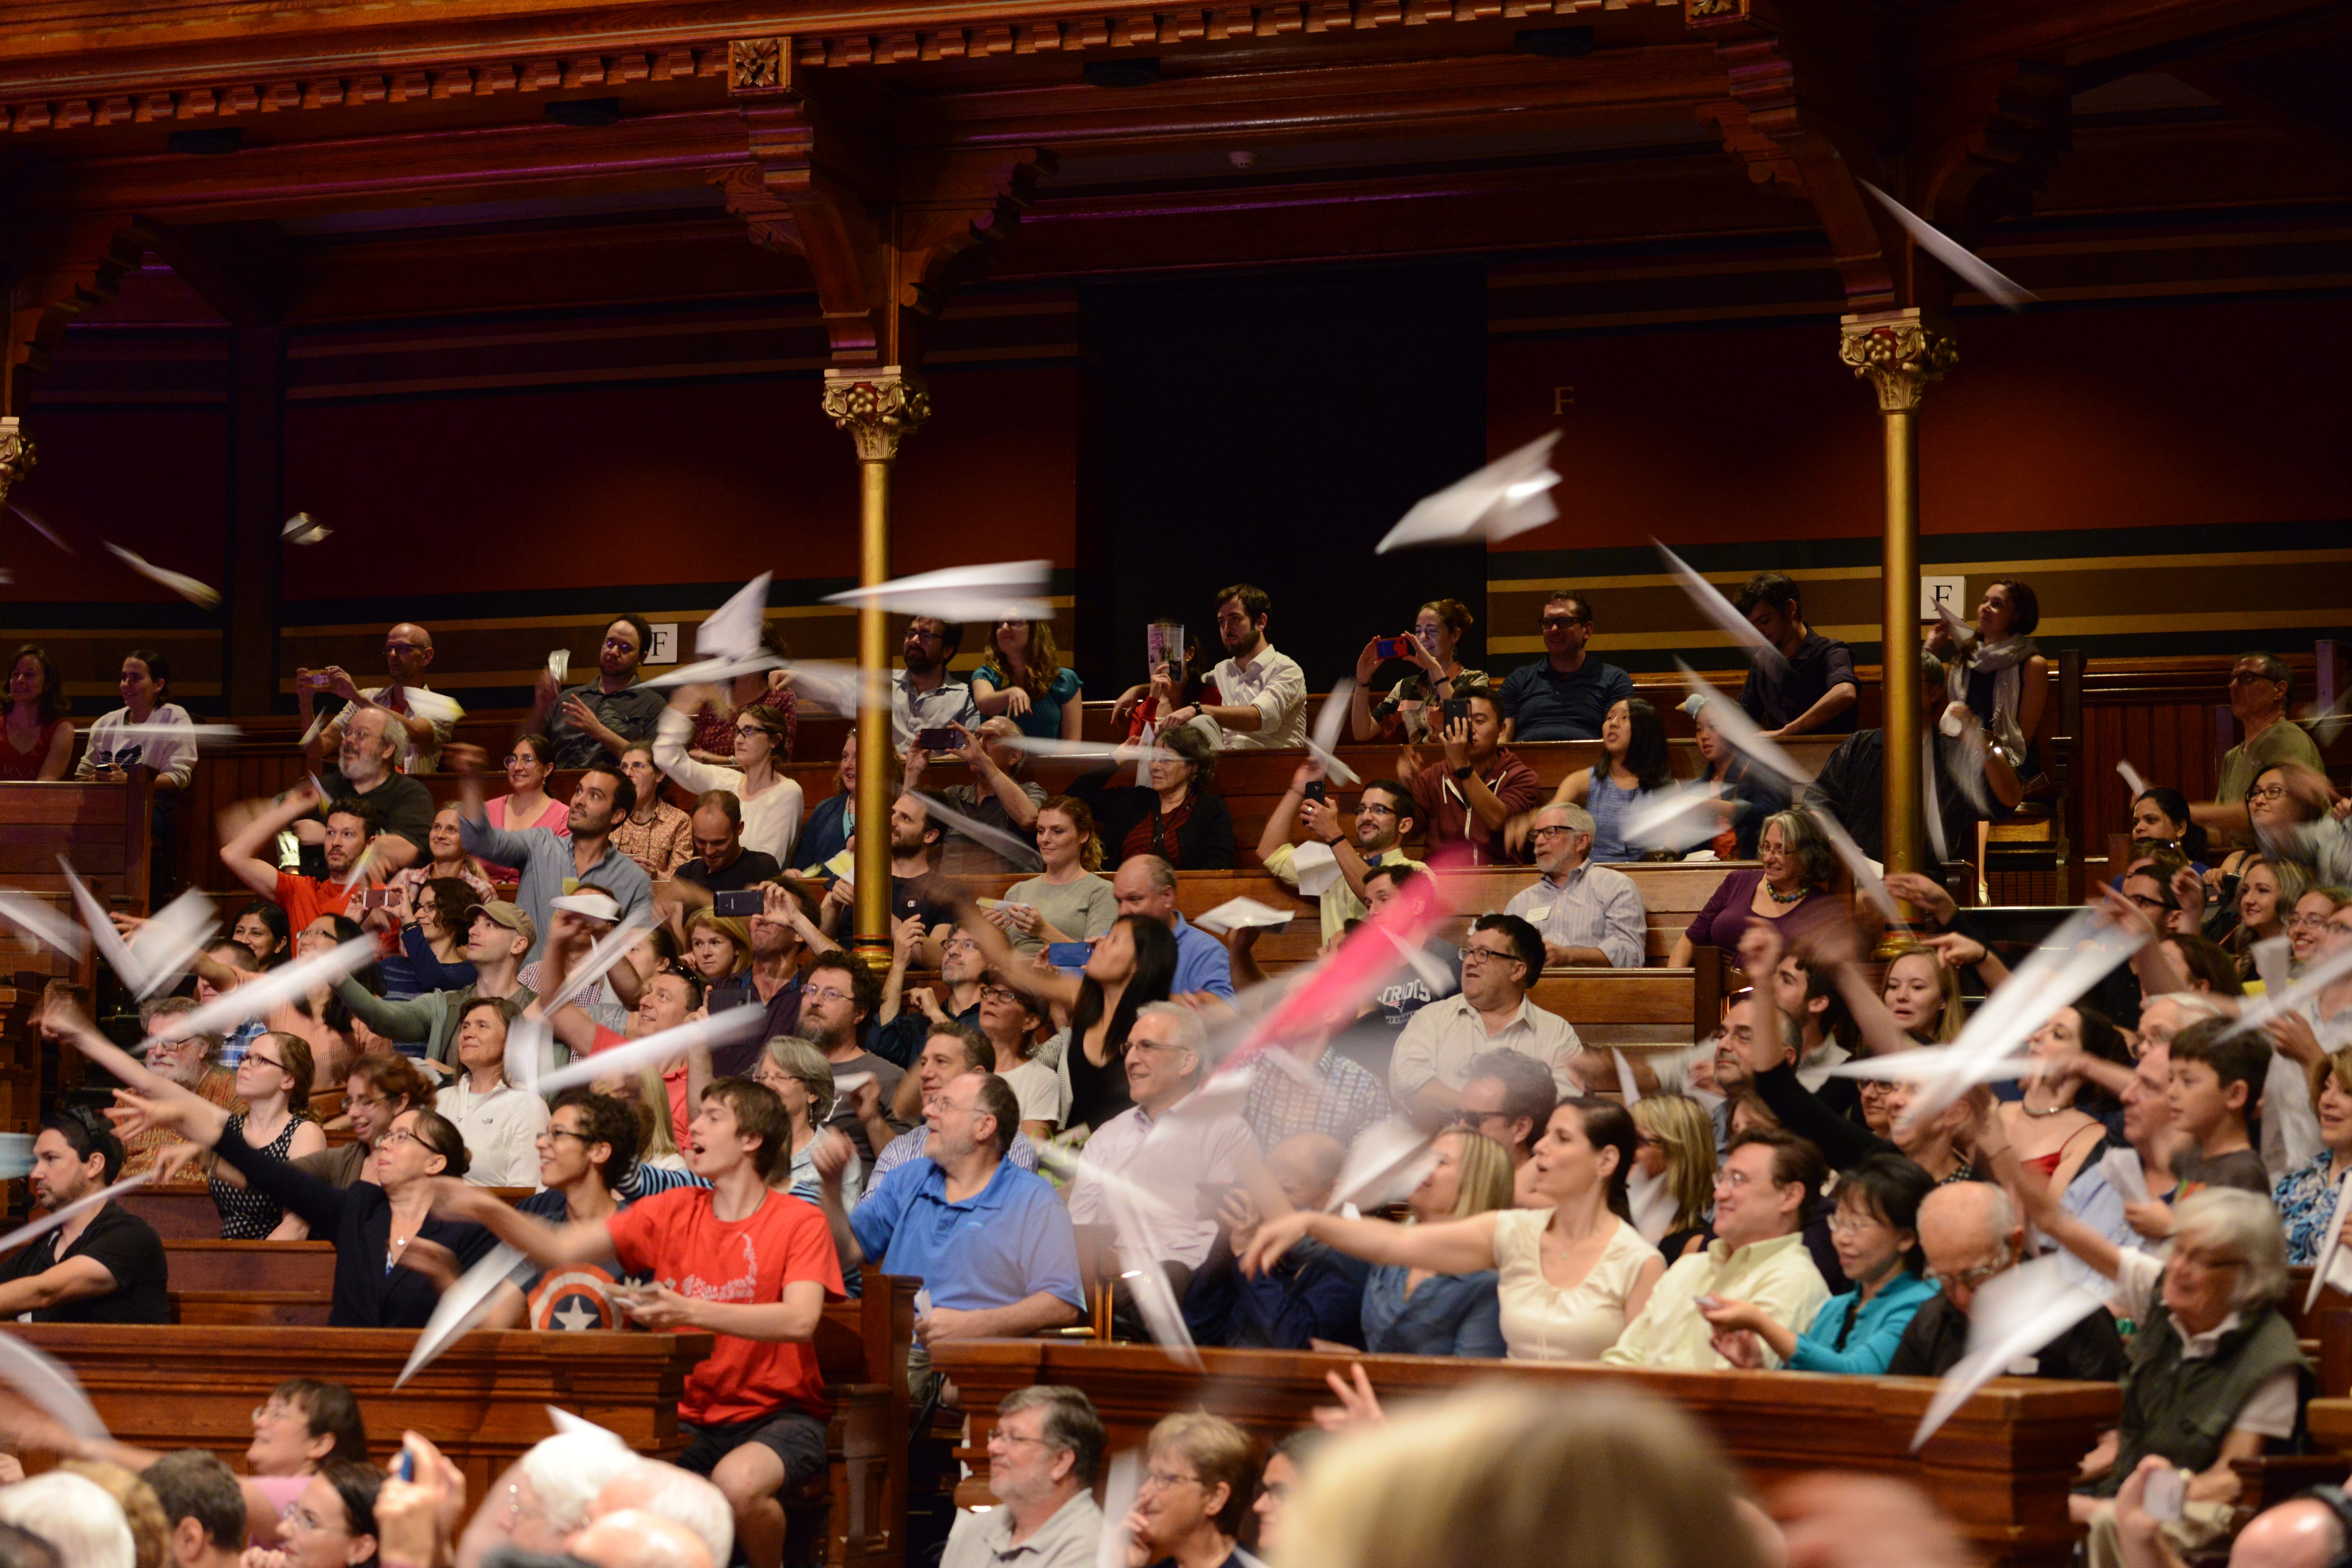 Paper airplanes are thrown by the audience. Credit: Mike Benveniste